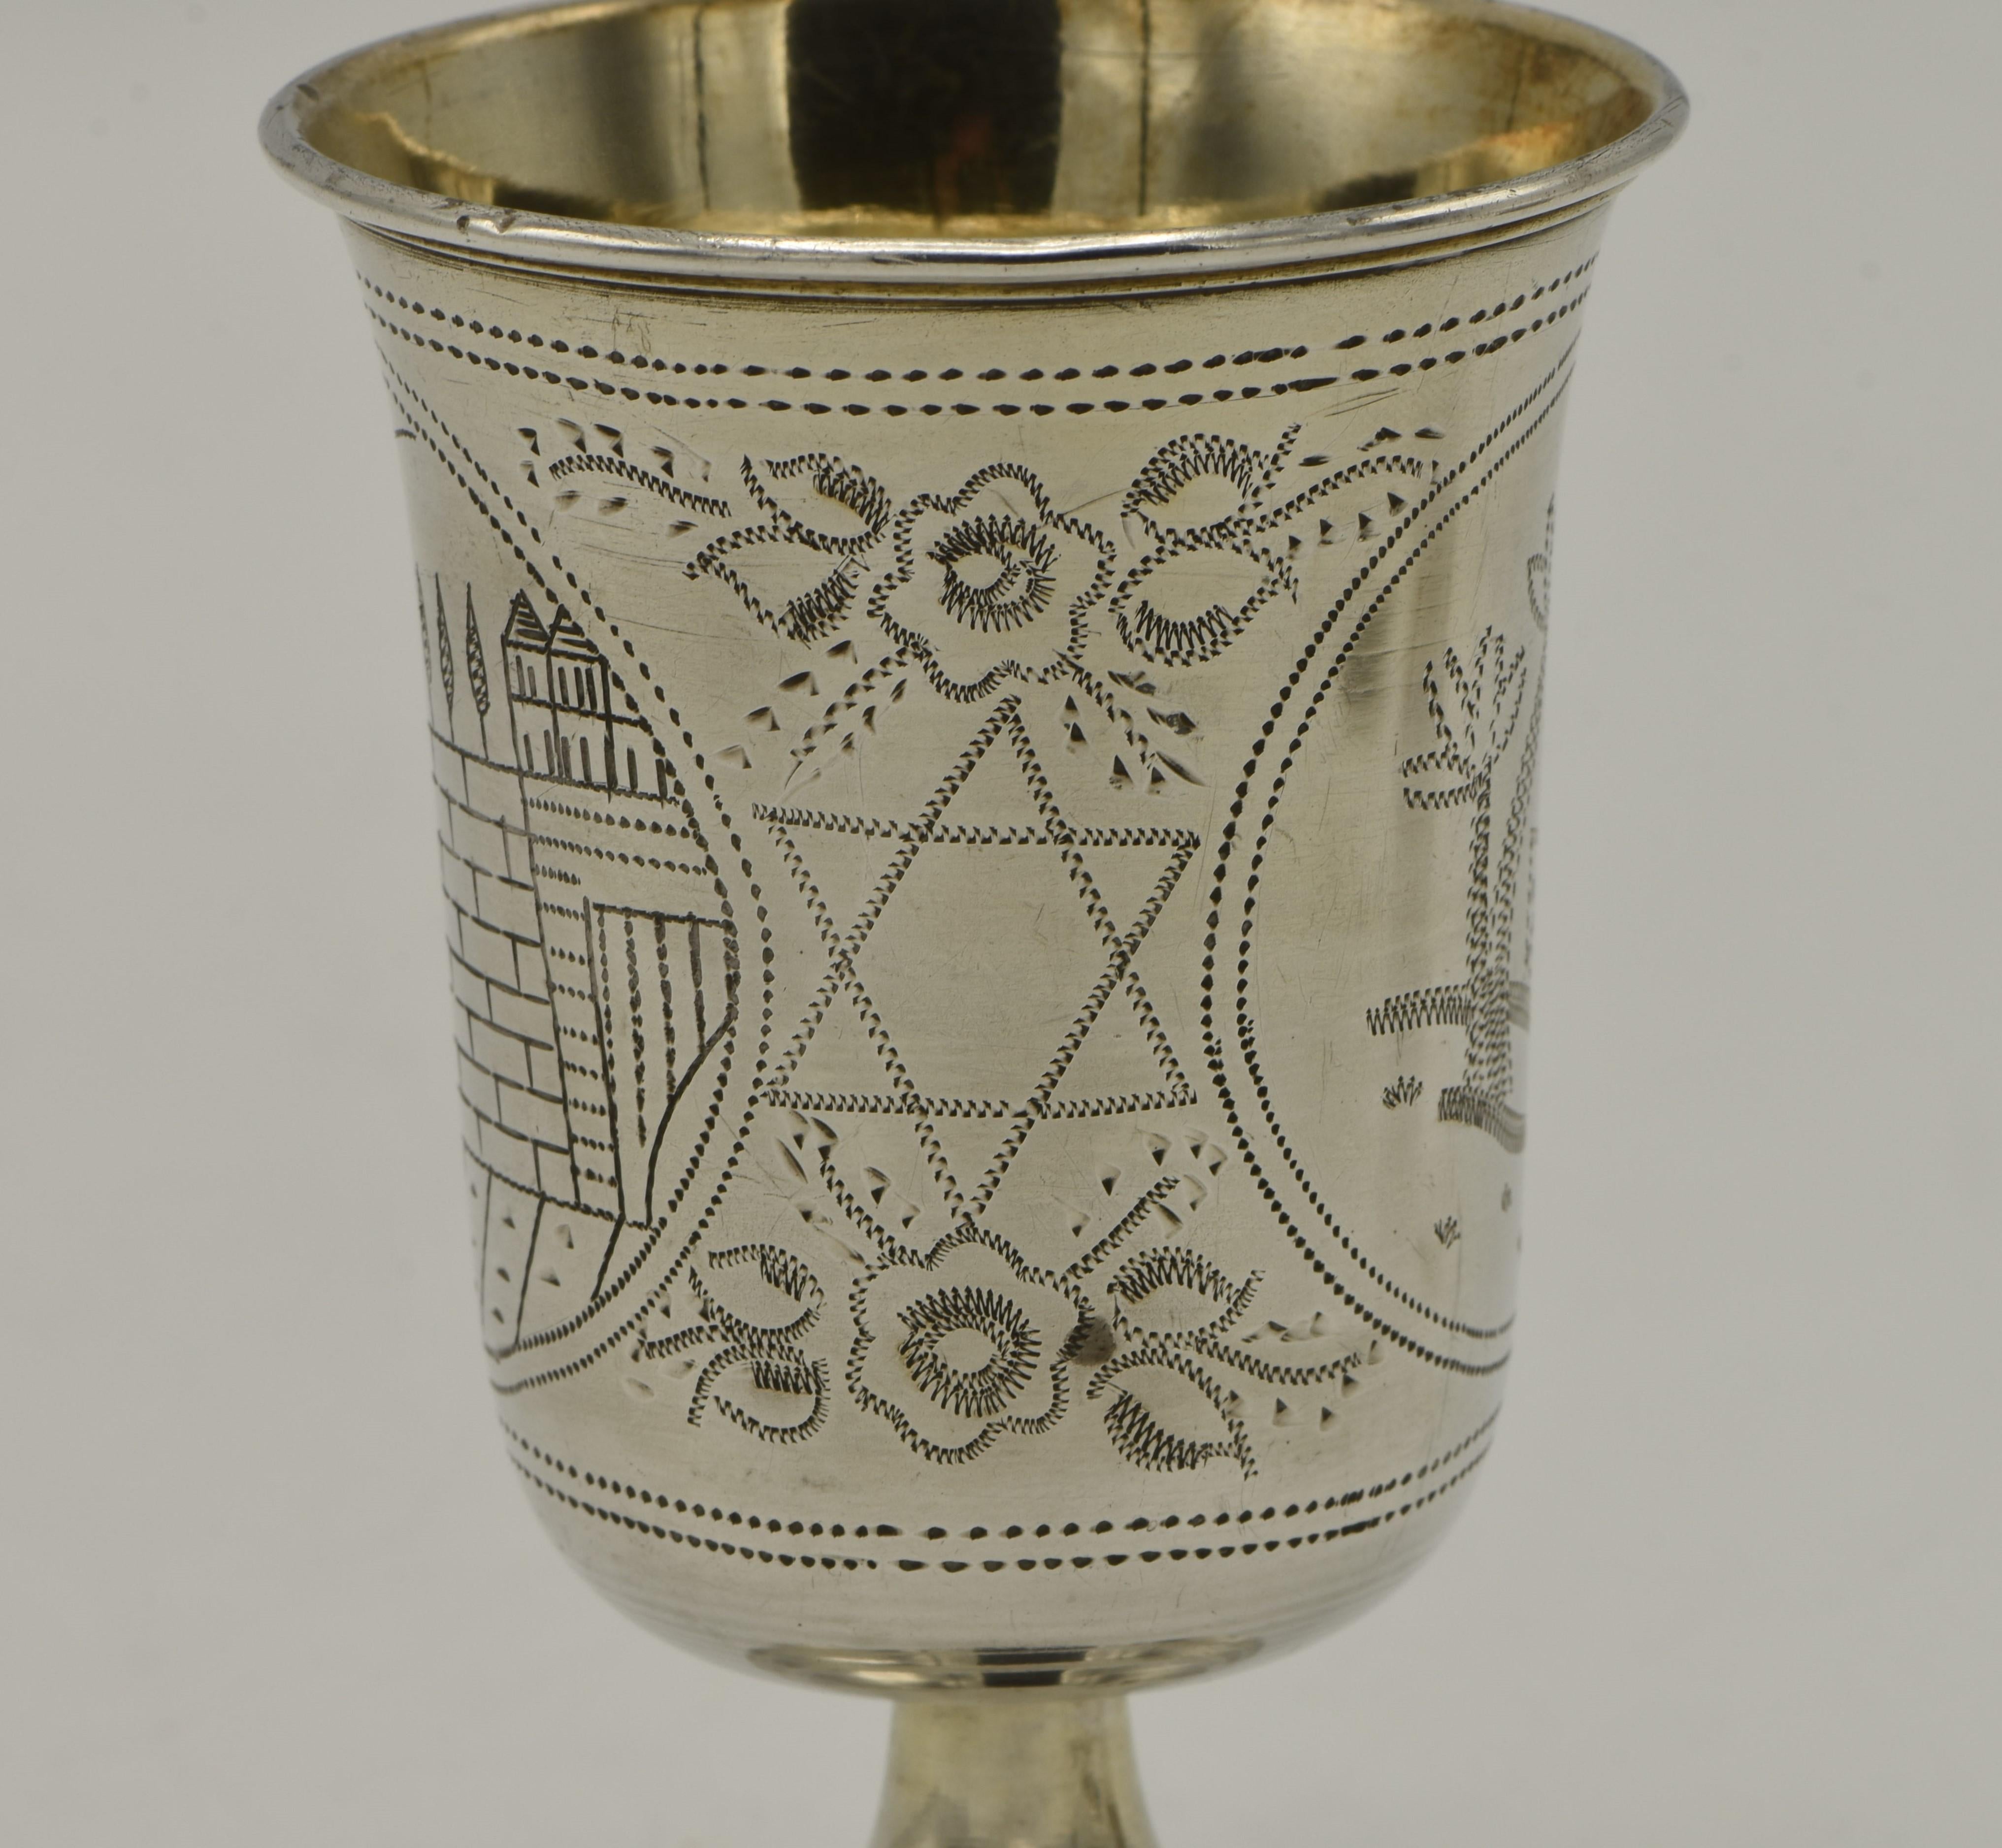 Engraved Late 19th Century Austrian Silver Kiddush Goblet with Saucer